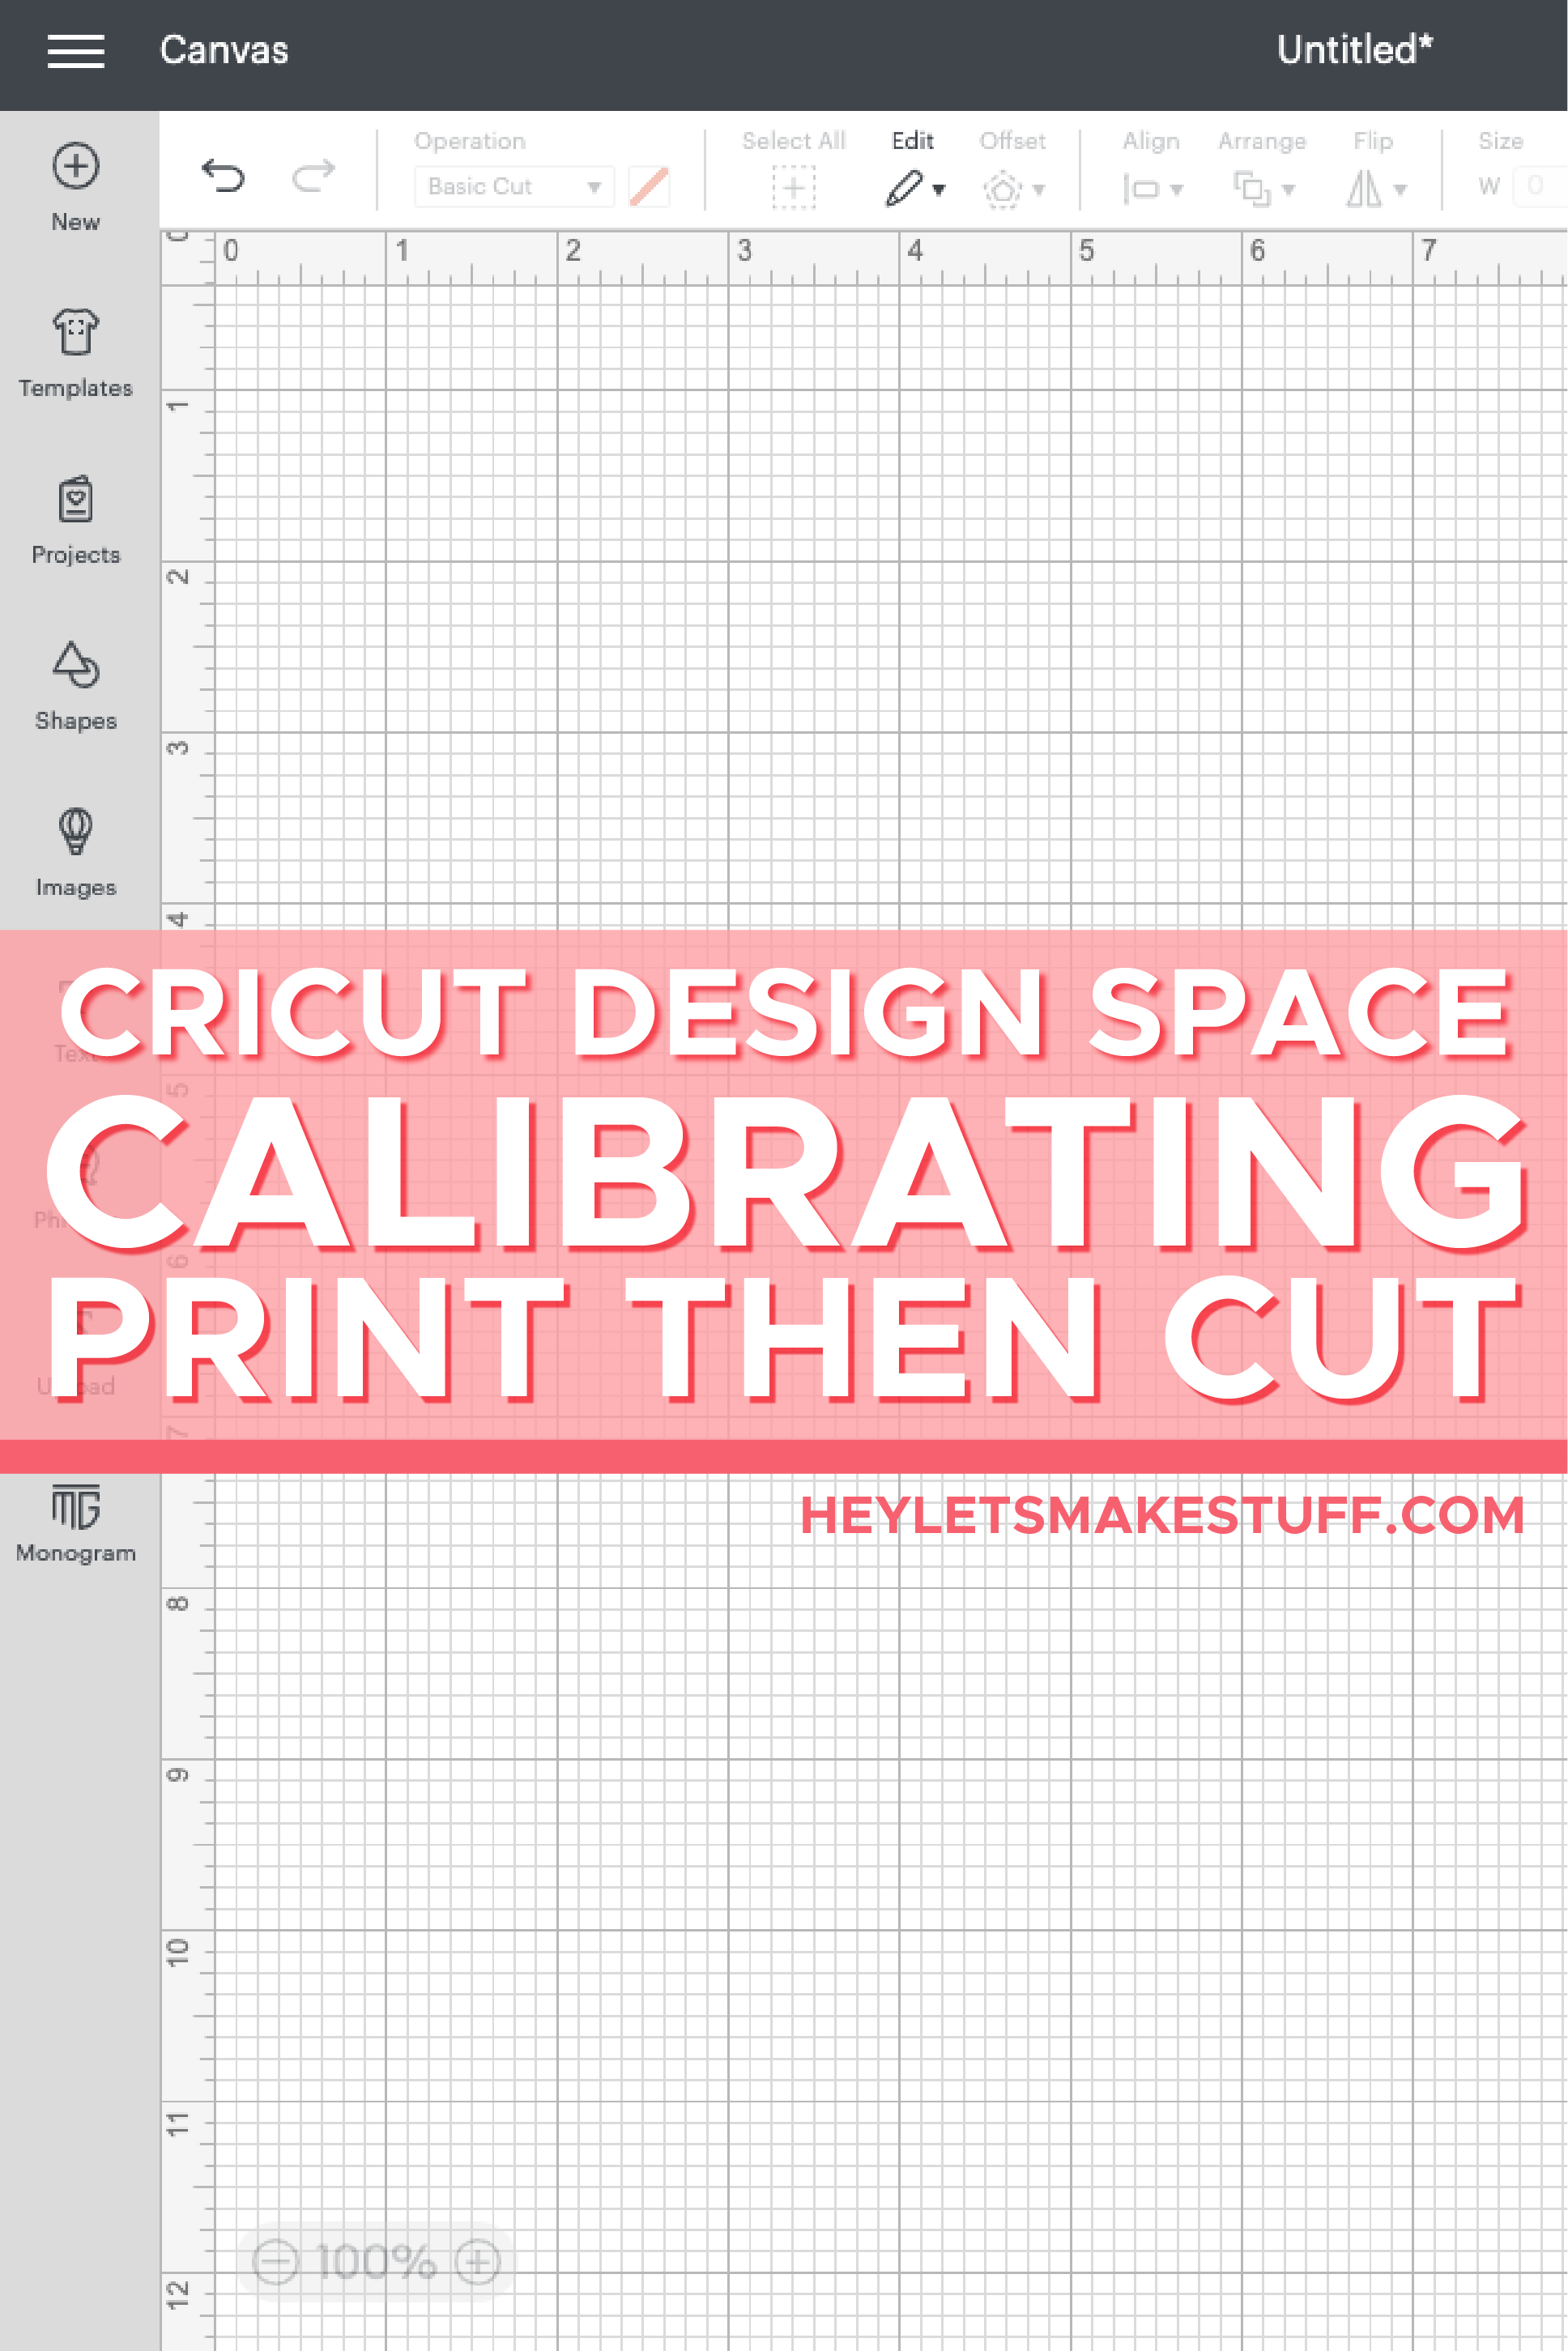 What Are Cricut Mats? [Types, Uses, and Features], by  CricutDesignSpacesetup